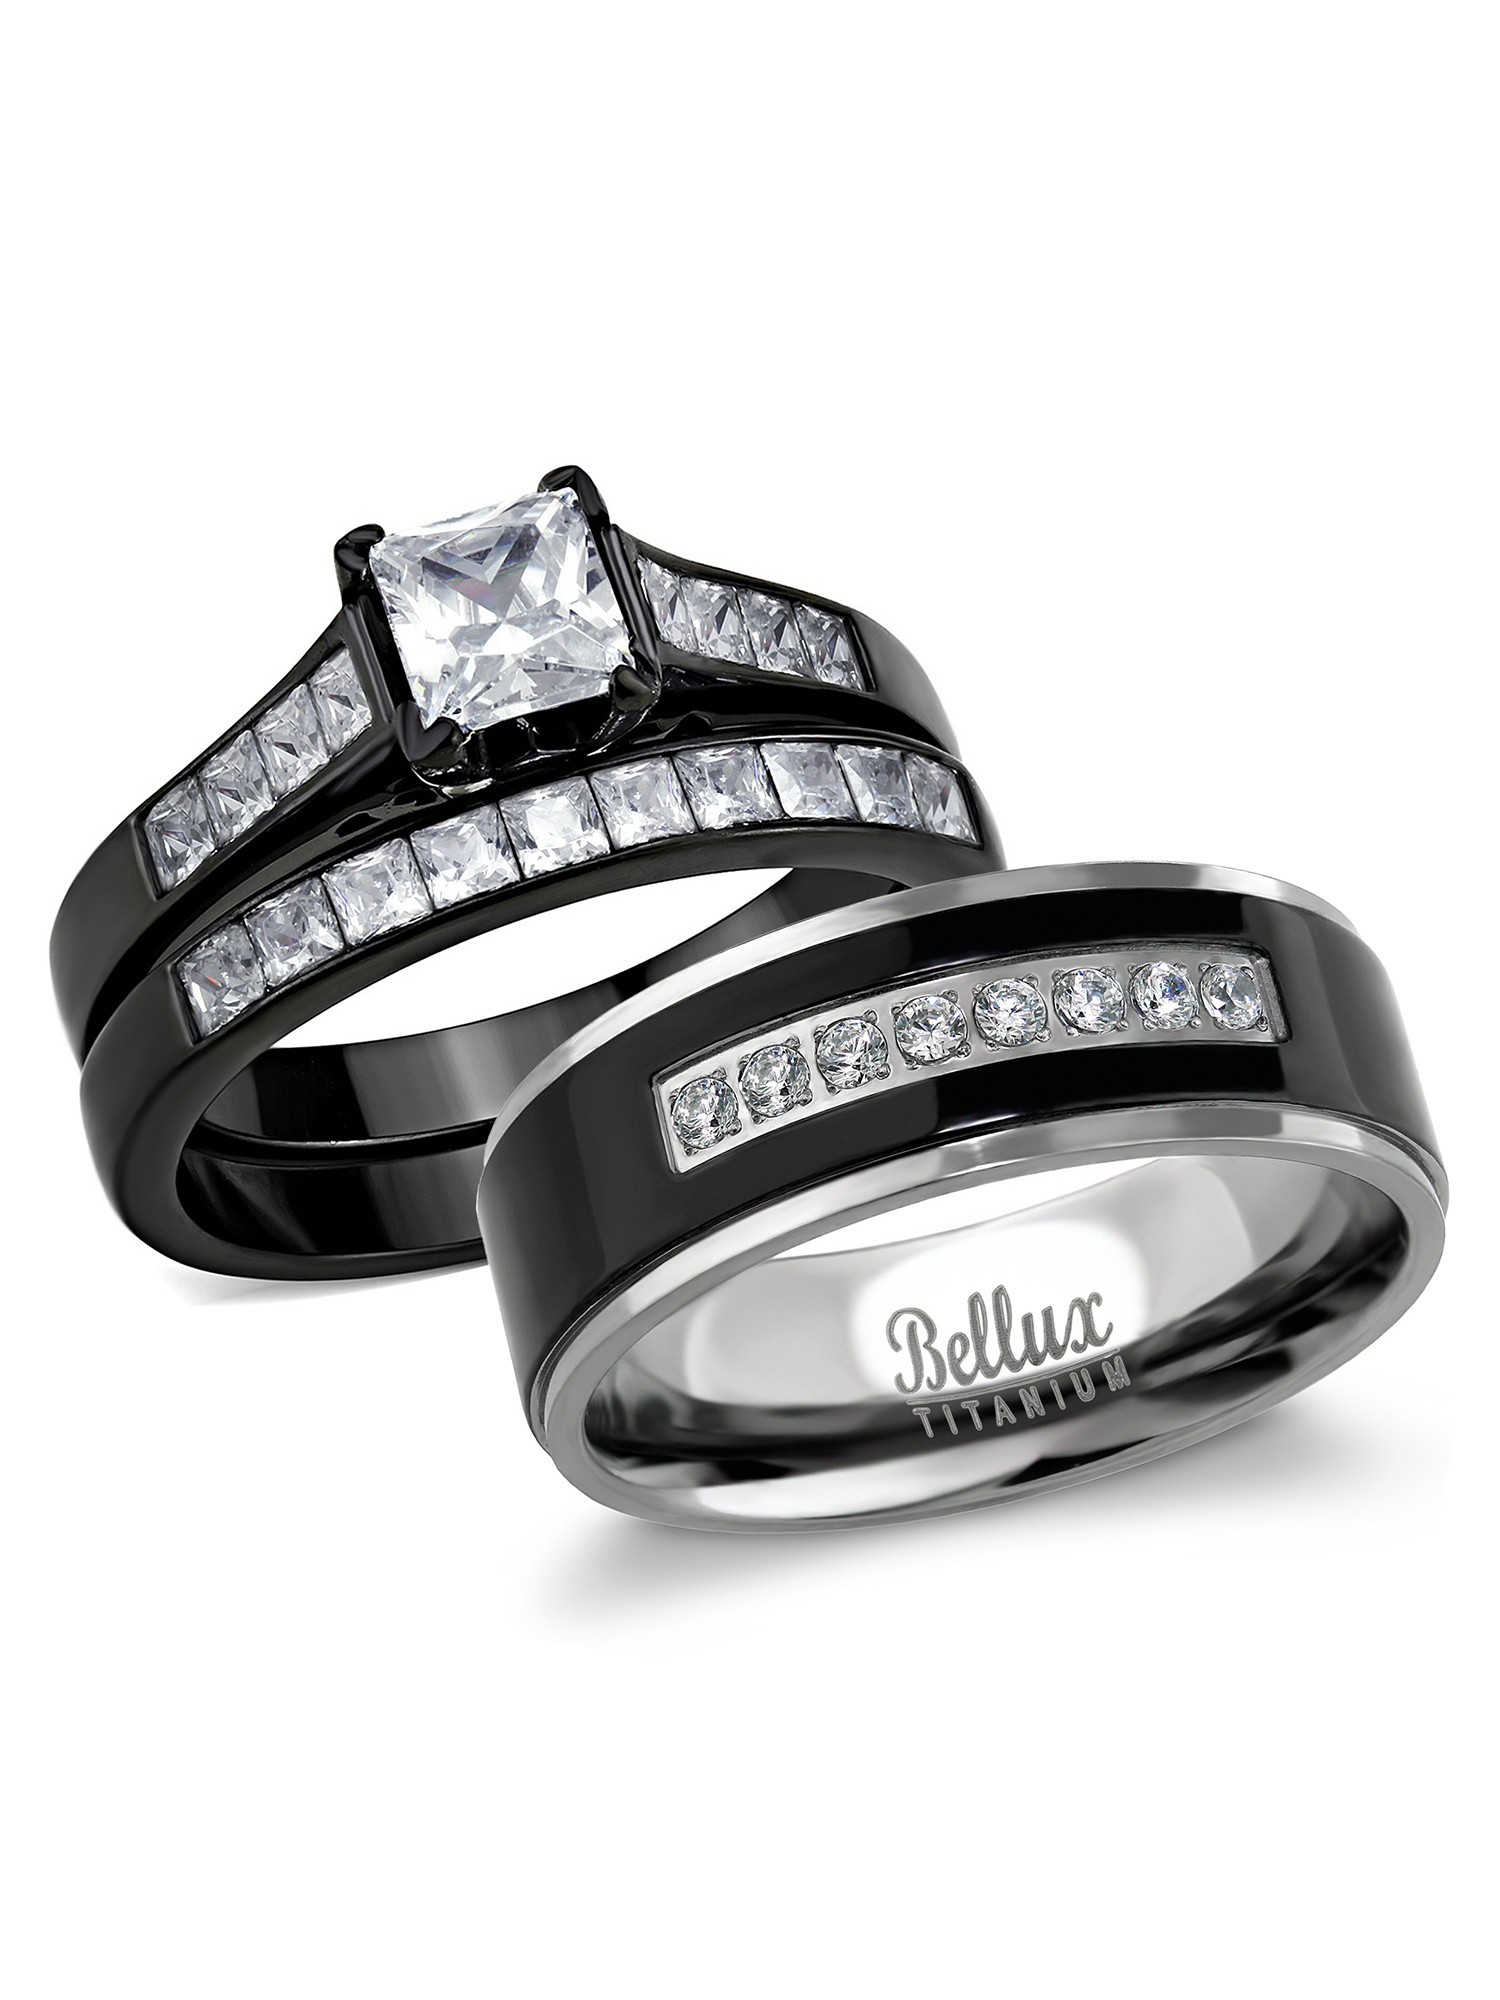 Walmart His And Hers Wedding Rings
 Bellux Style His and Hers Wedding Ring Sets Couples